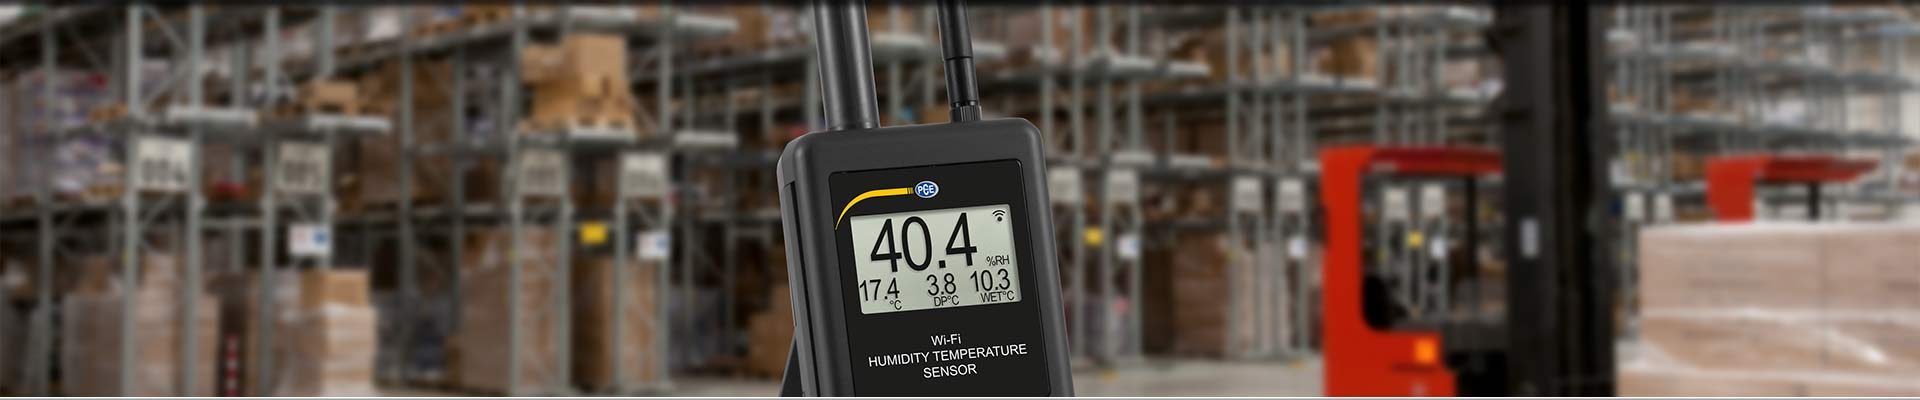 https://www.pce-instruments.com/english/g/custom/category-pictures/data-logger-for-temperature-and-humidity-slider.jpg